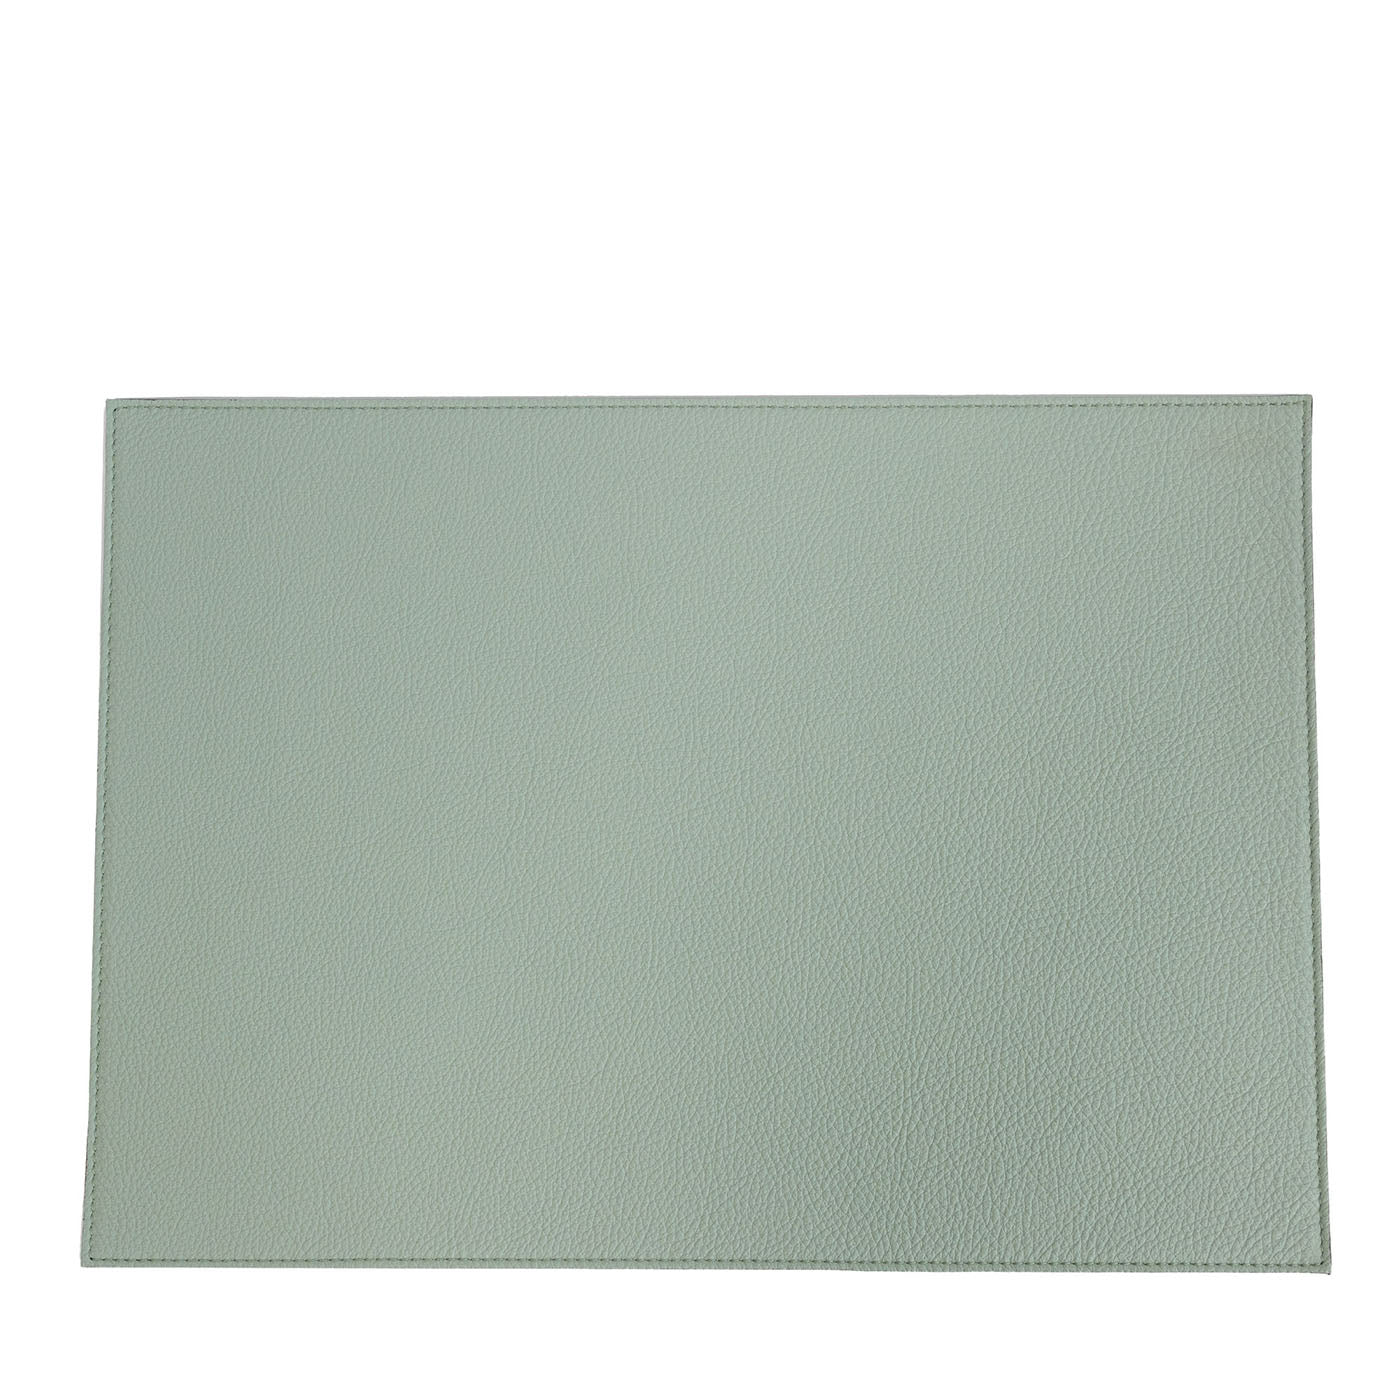 Soft Suite Smeralda Green Set of 2 Placemats - Main view